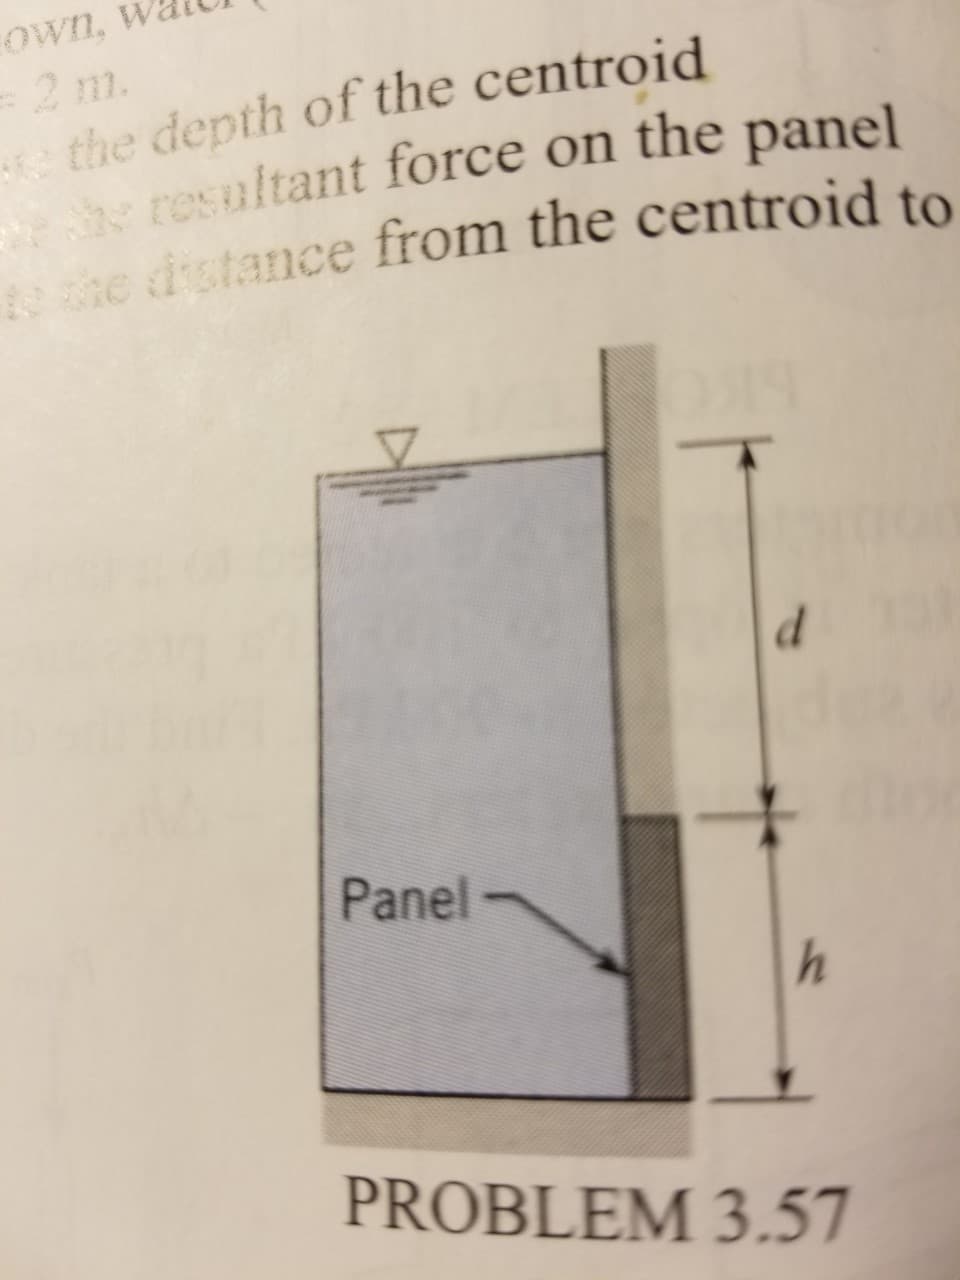 Own,
2 m.
e the depth of the centroid
e heresultant force on the panel
the distance from the centroid to
Panel
h
PROBLEM 3.57
